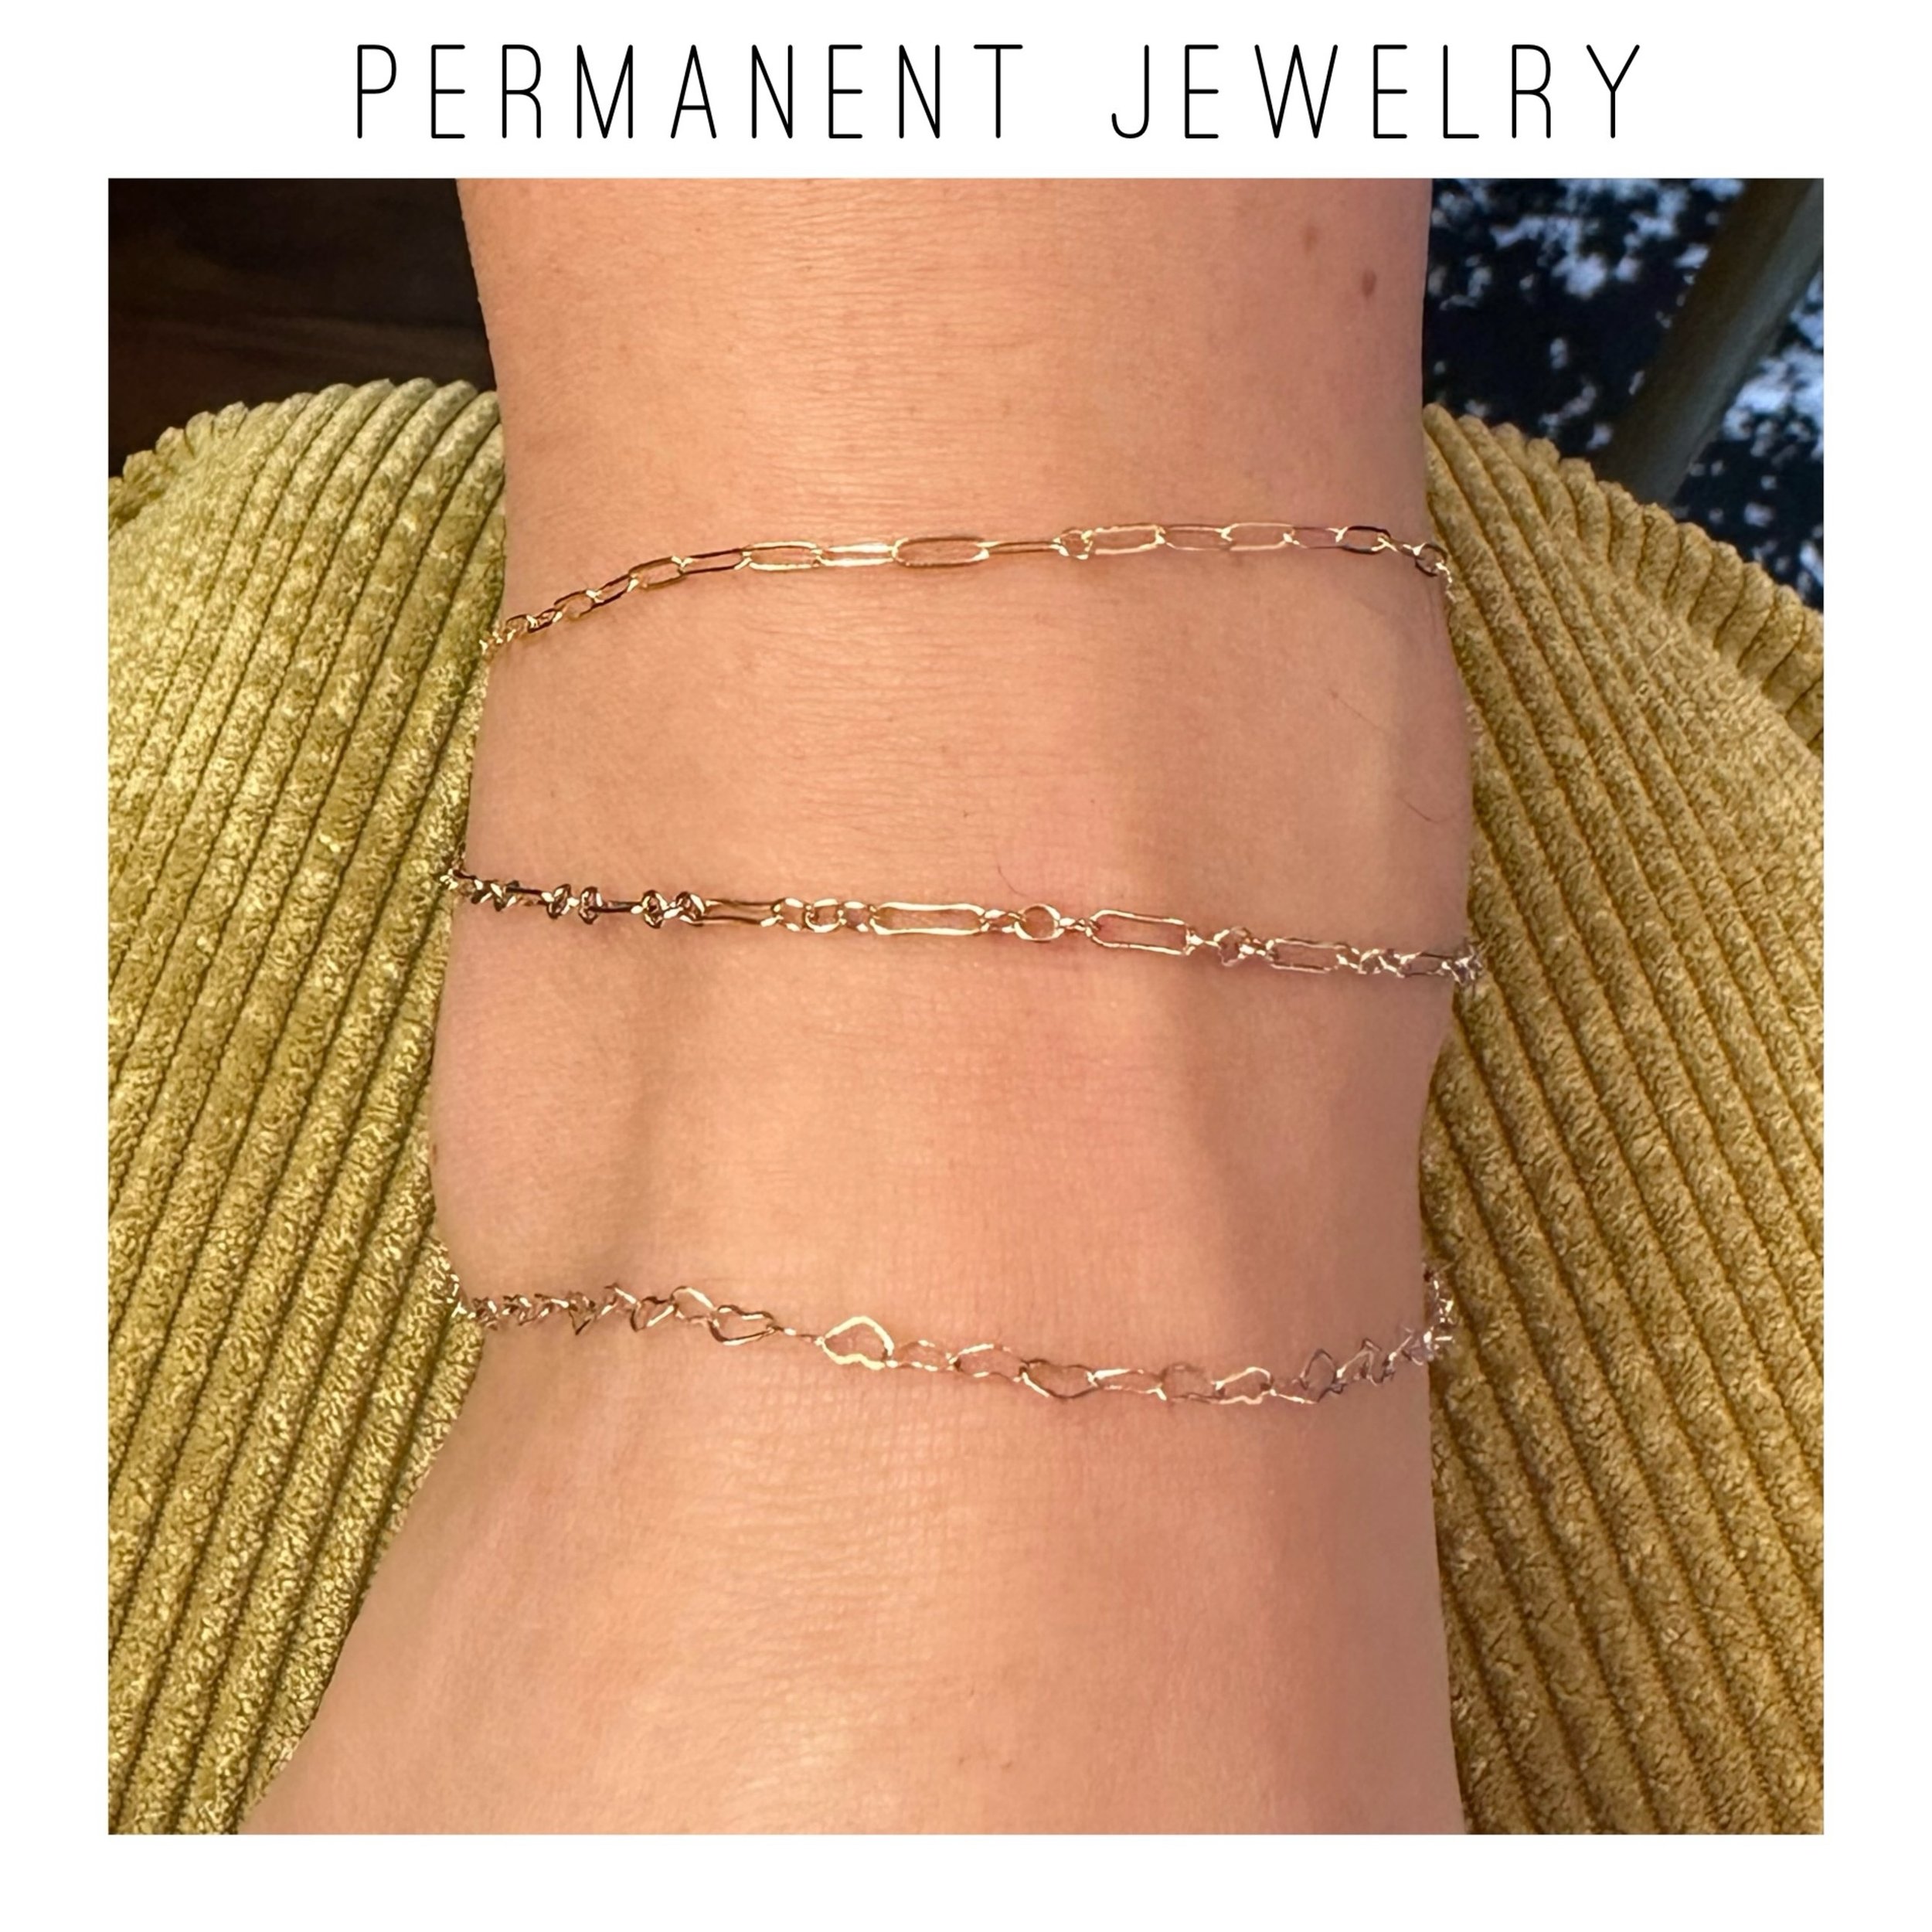 Anklet season is upon us. ✨ Experience everlasting elegance with our stunning collection of permanent jewelry. At Beauty Rule, our team of jewelry specialists is dedicated to crafting personalized treasures in gold, rose gold, and silver. During your